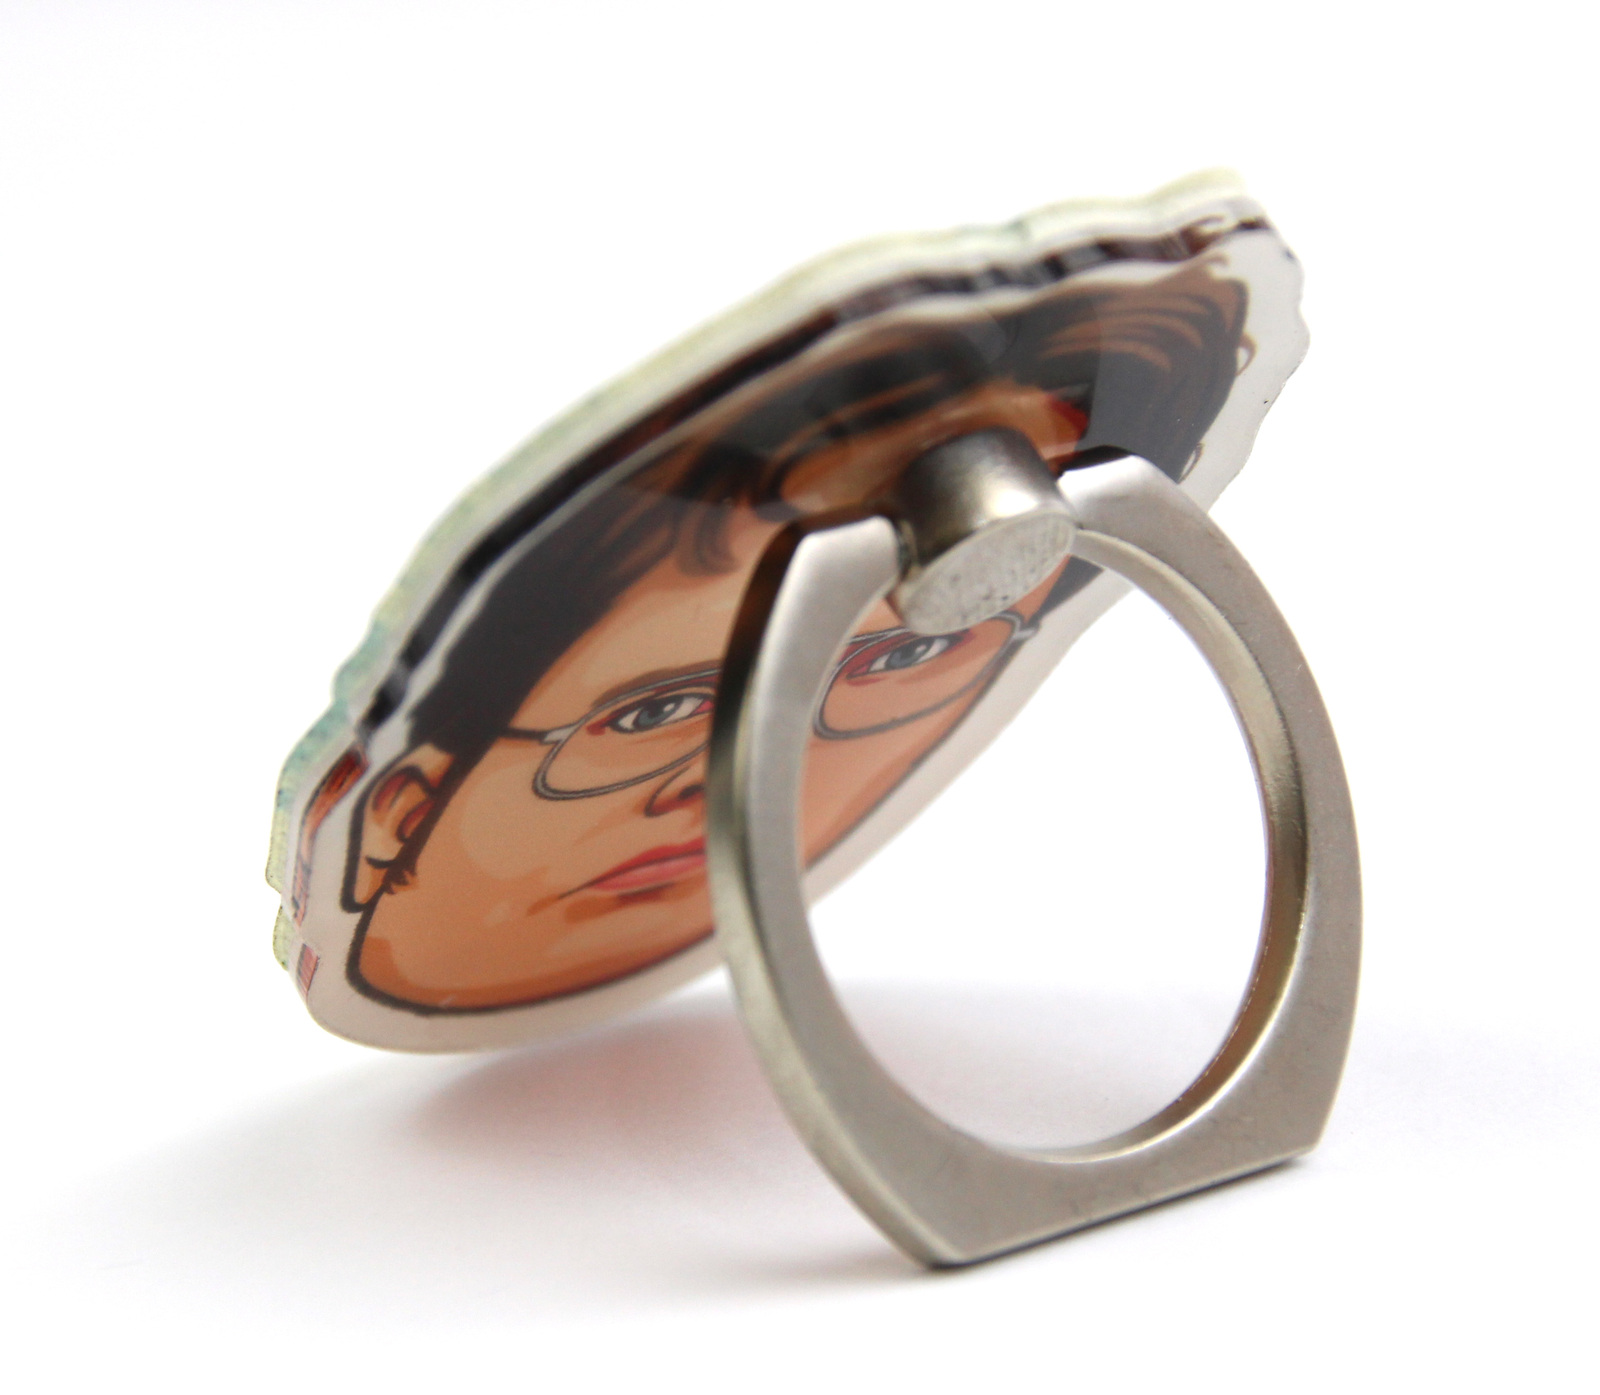 dwight-schrute-phone-ring-holder